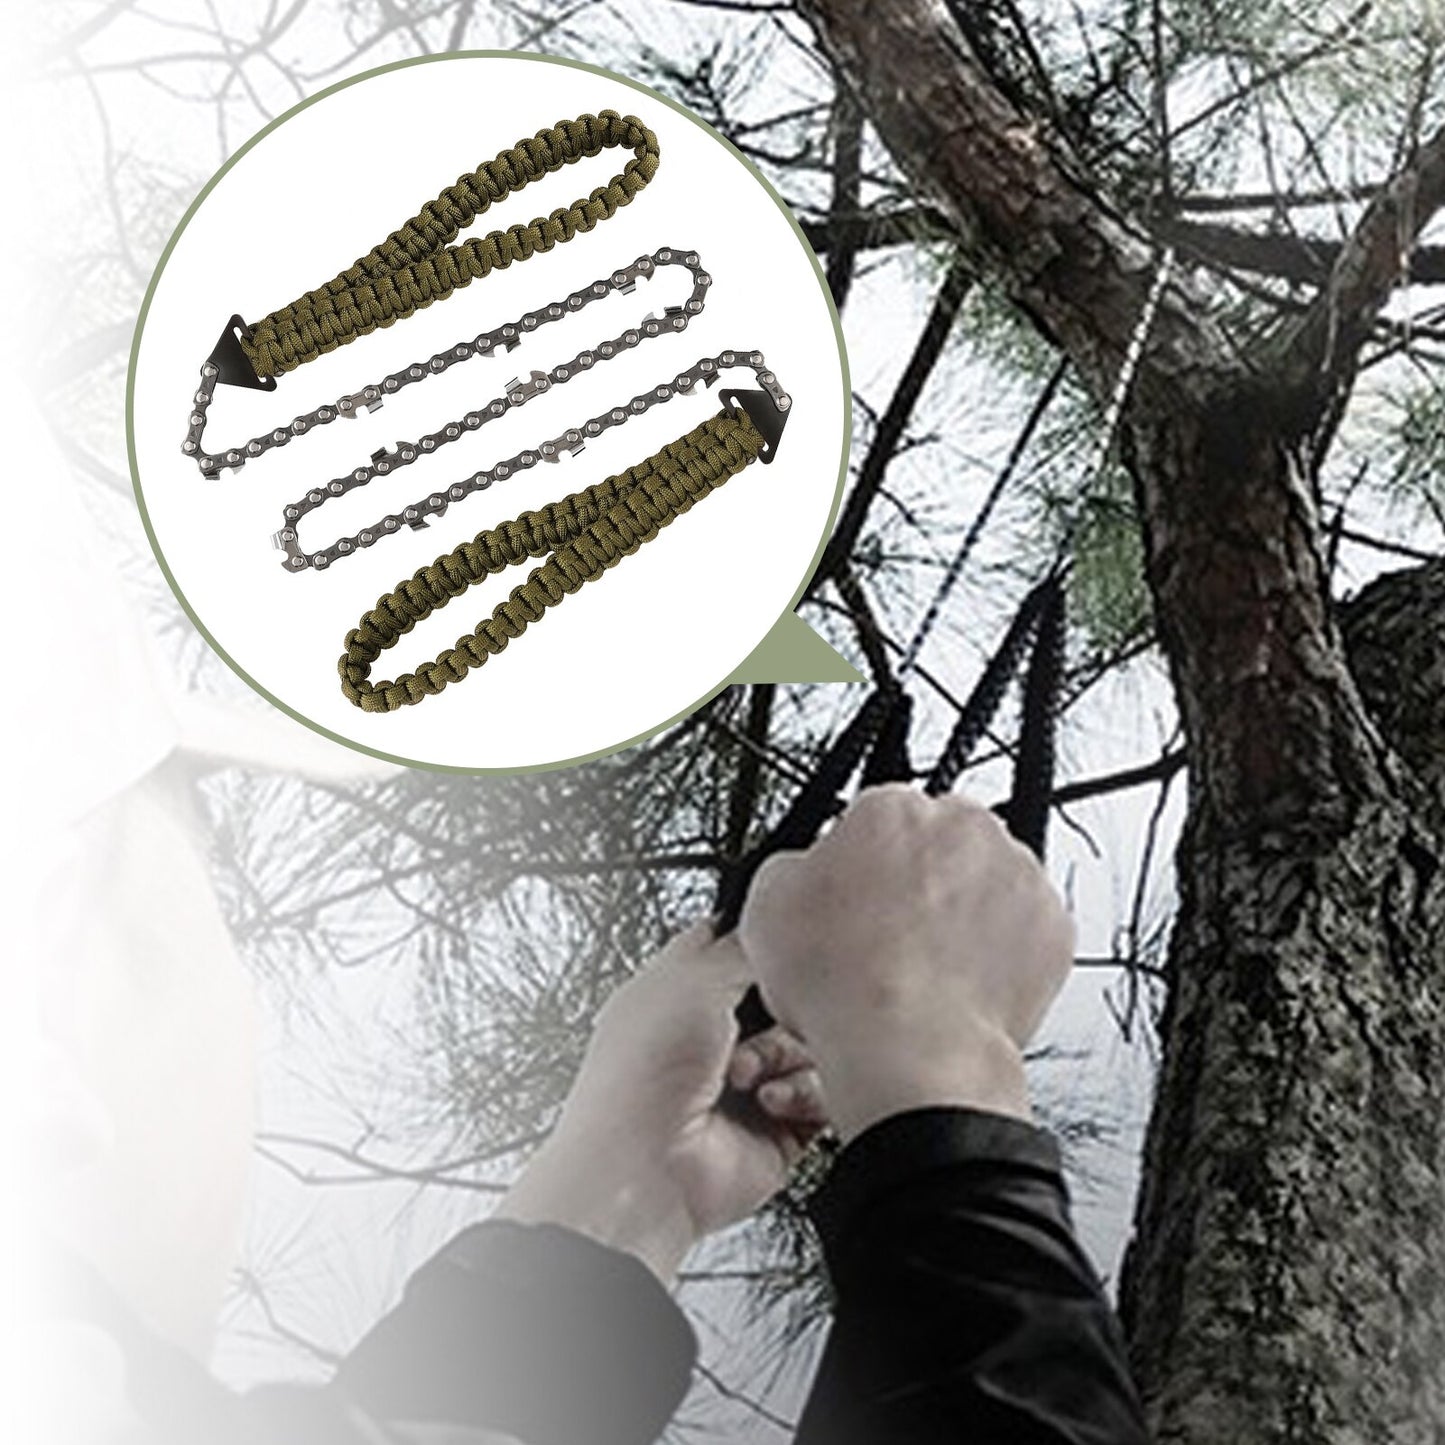 Pocket Chainsaw With Paracord Handle Outdoor Survival Gear Folding Chain Hand Saw Fast Wood & Tree Cutting Hand Chainsaw For